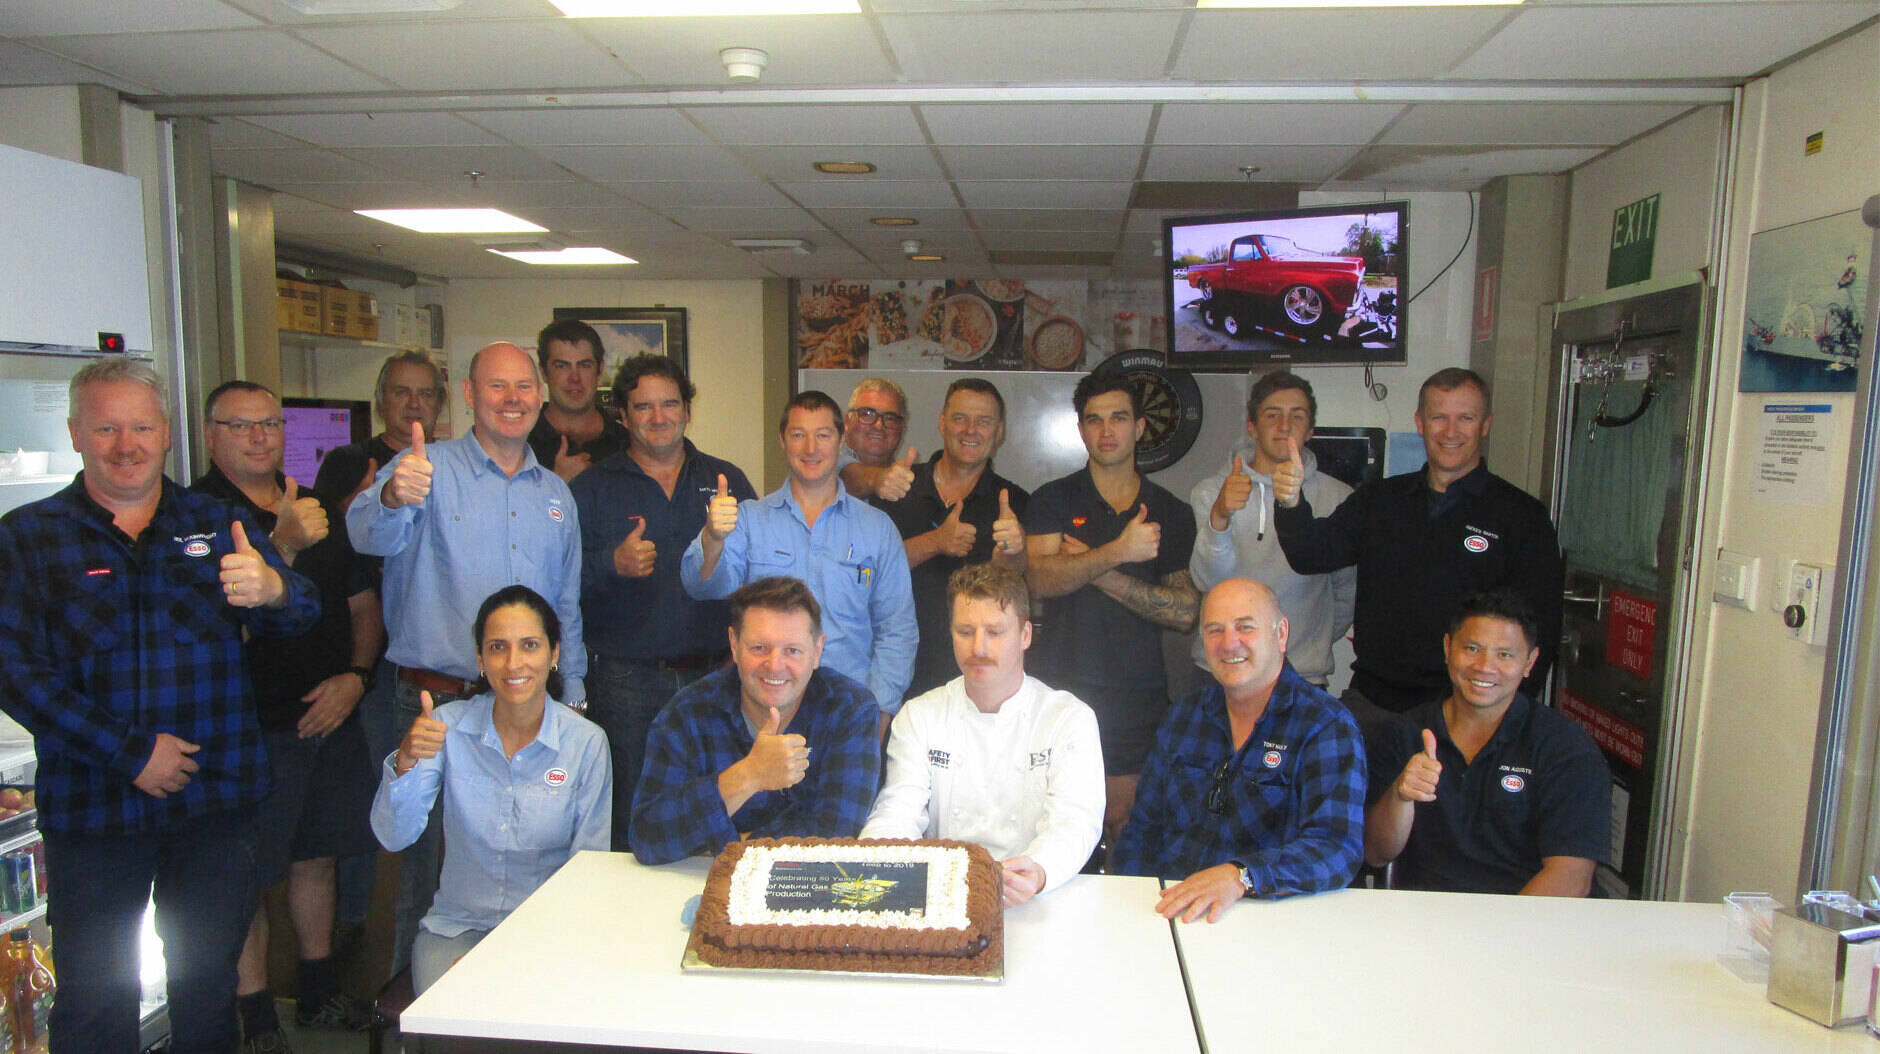 Image Photo Staff on Barracouta platform celebrate the 50 year anniversary.